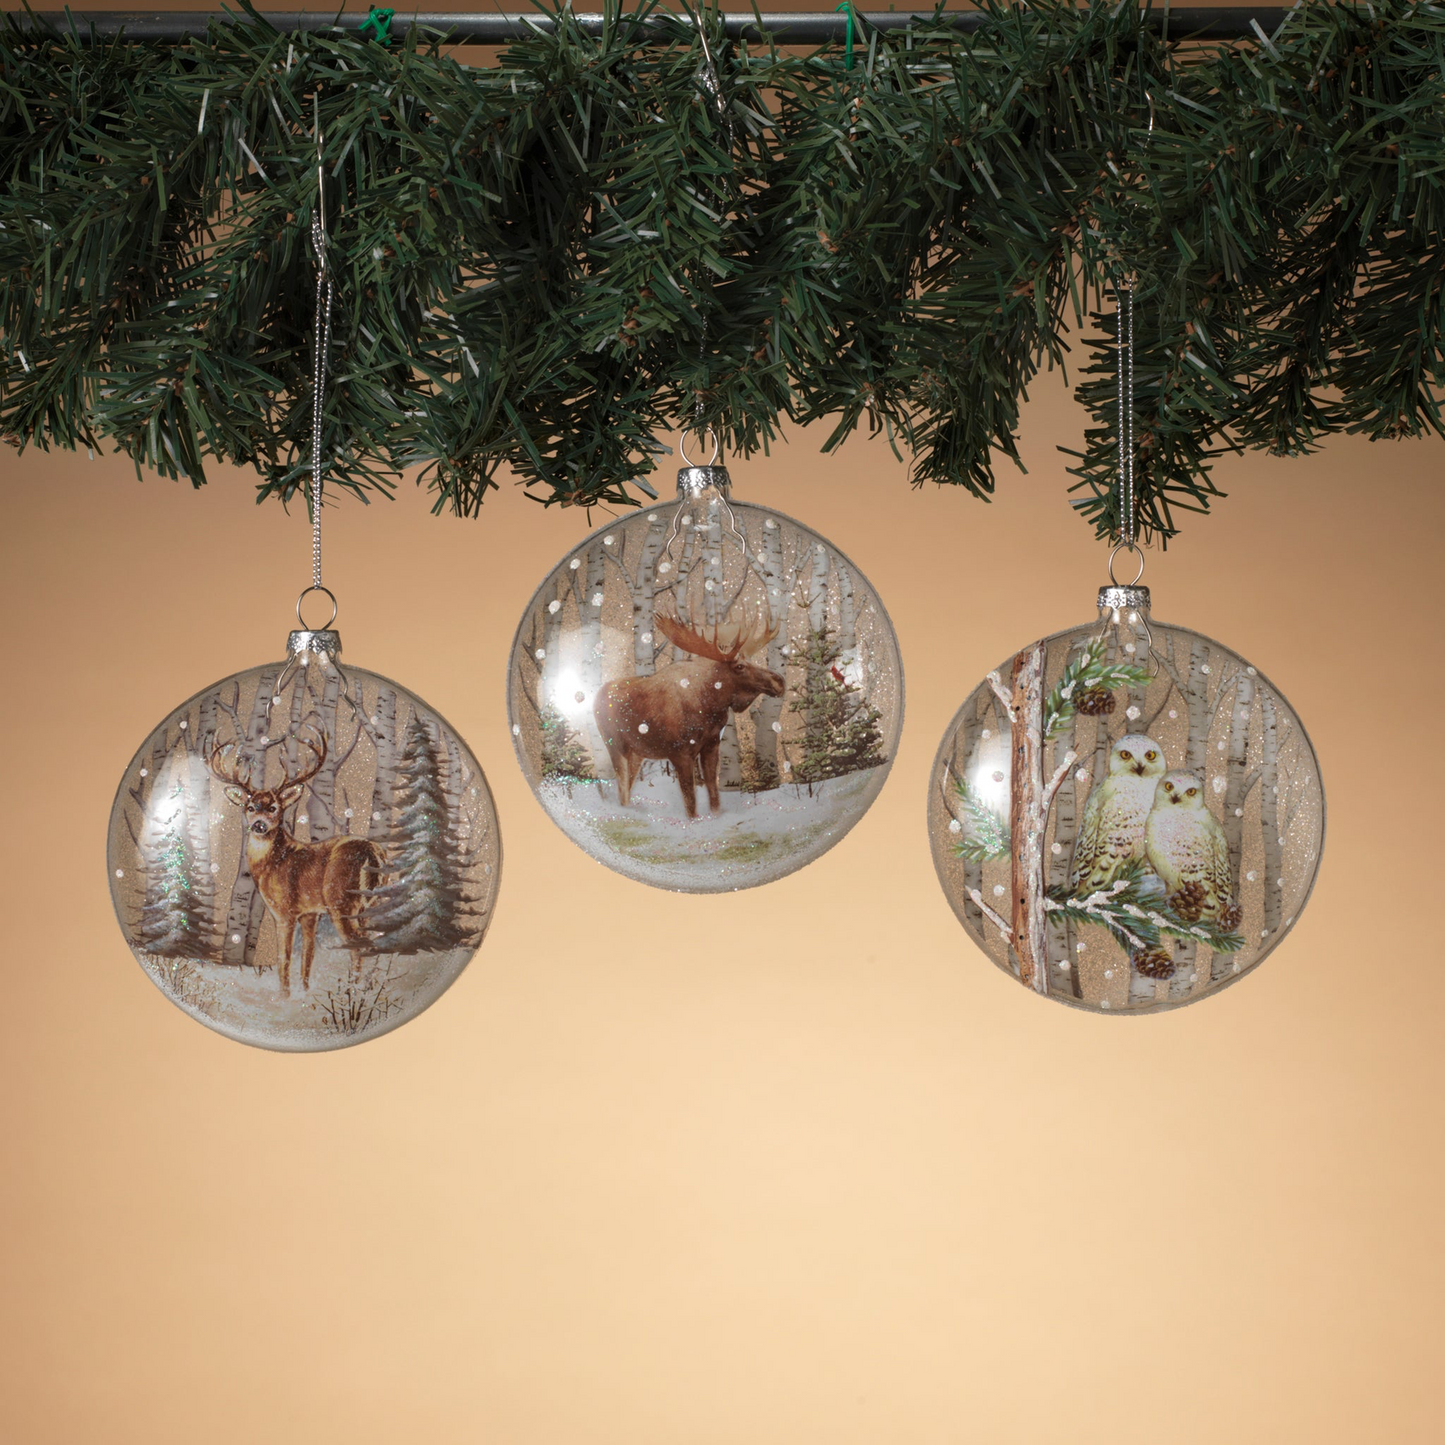 4 INCH GLASS DISK ORNAMENT WITH DEER, MOOSE & OWL - 3 ASSORTED